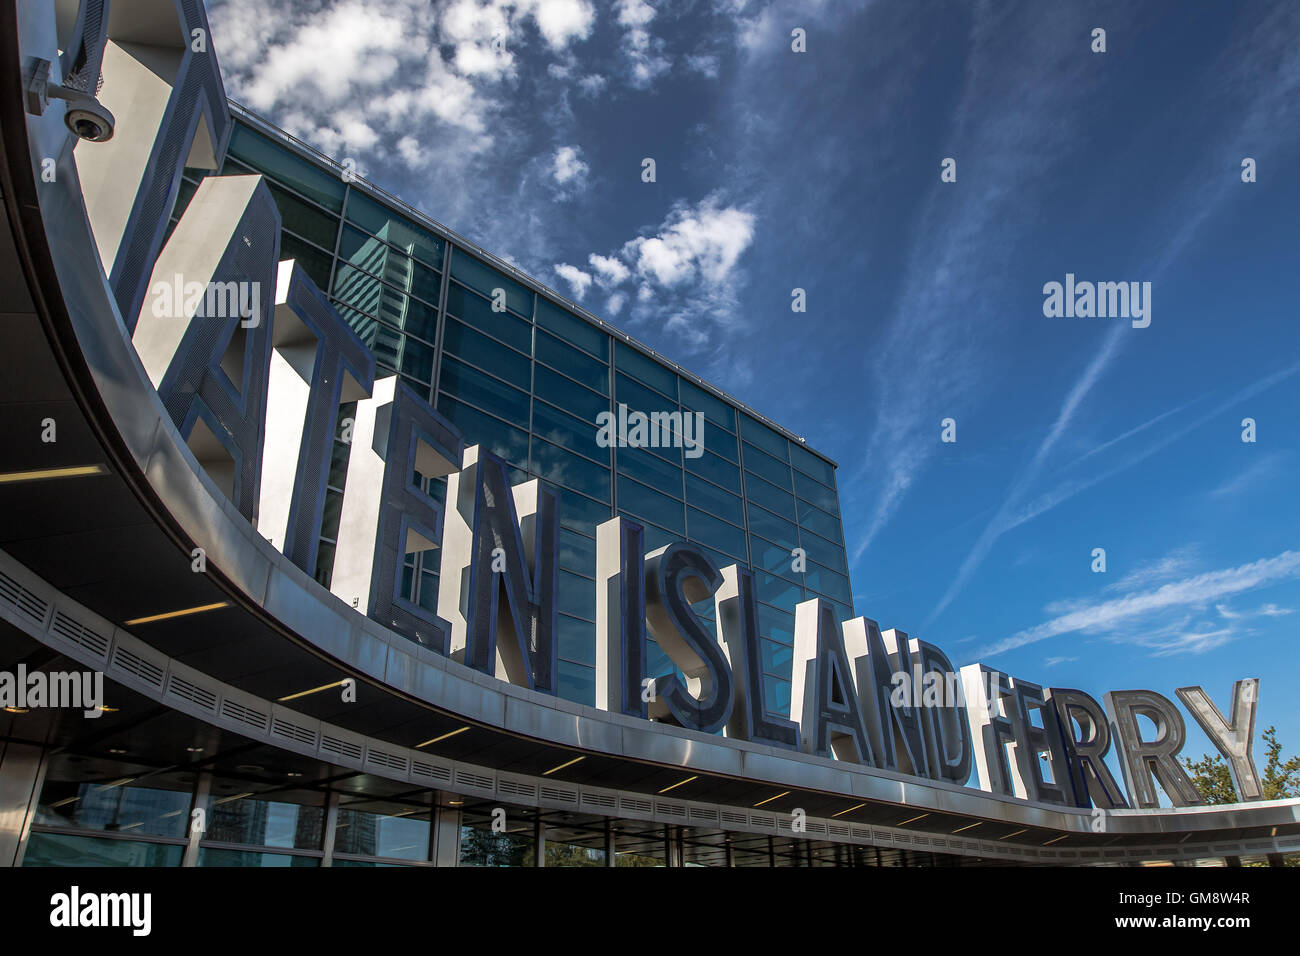 The large letters of the Staten Island Ferry terminal Stock Photo